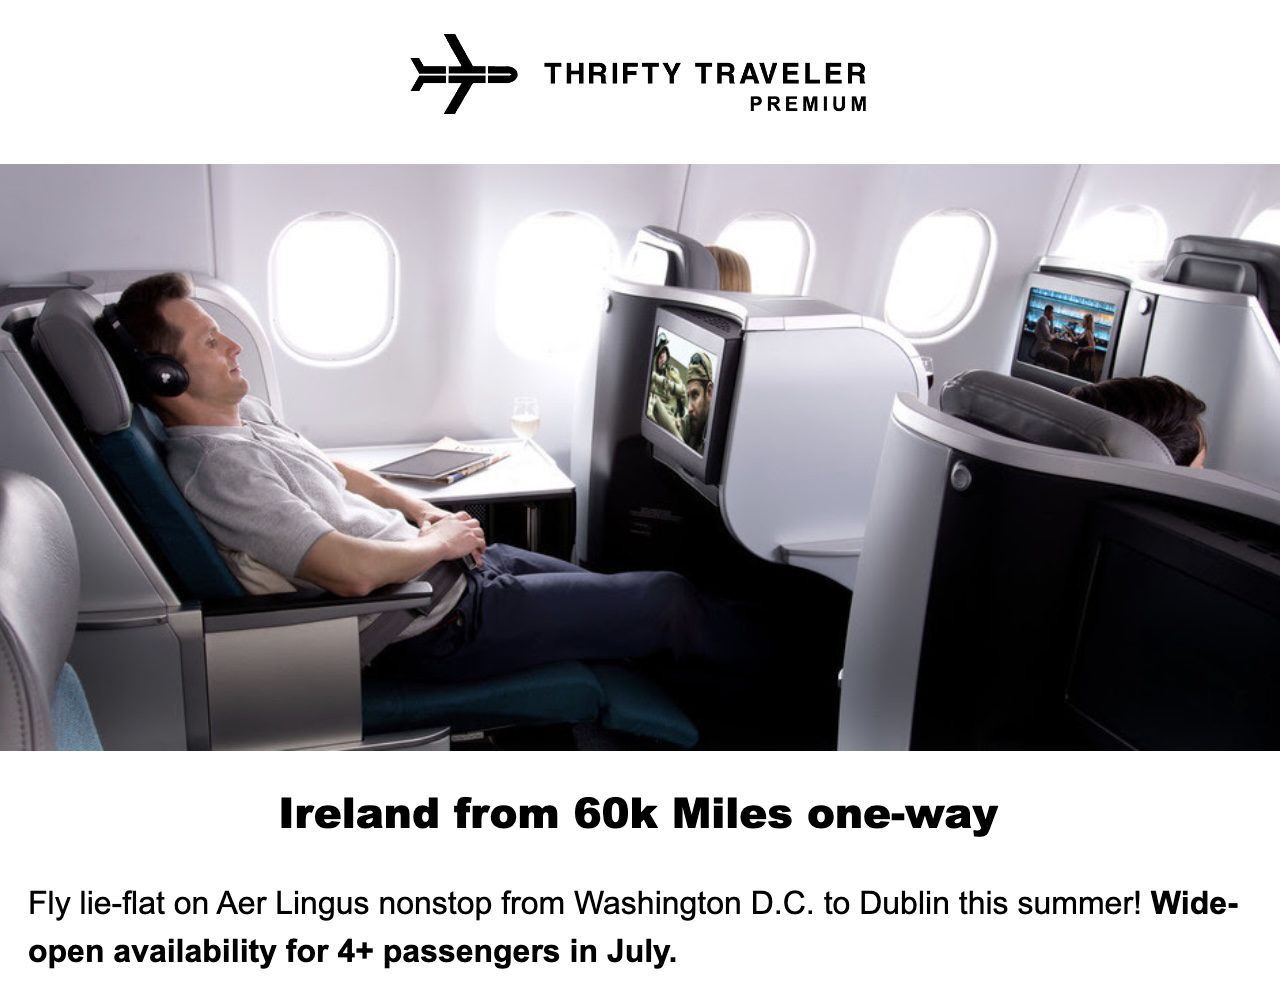 Aer Lingus business class  Cheap Flights to Ireland: Now&#039;s the Time to Book Your Emerald Isle Trip – Thrifty Traveler &#8211; Thrifty Traveler Aer Lingus biz